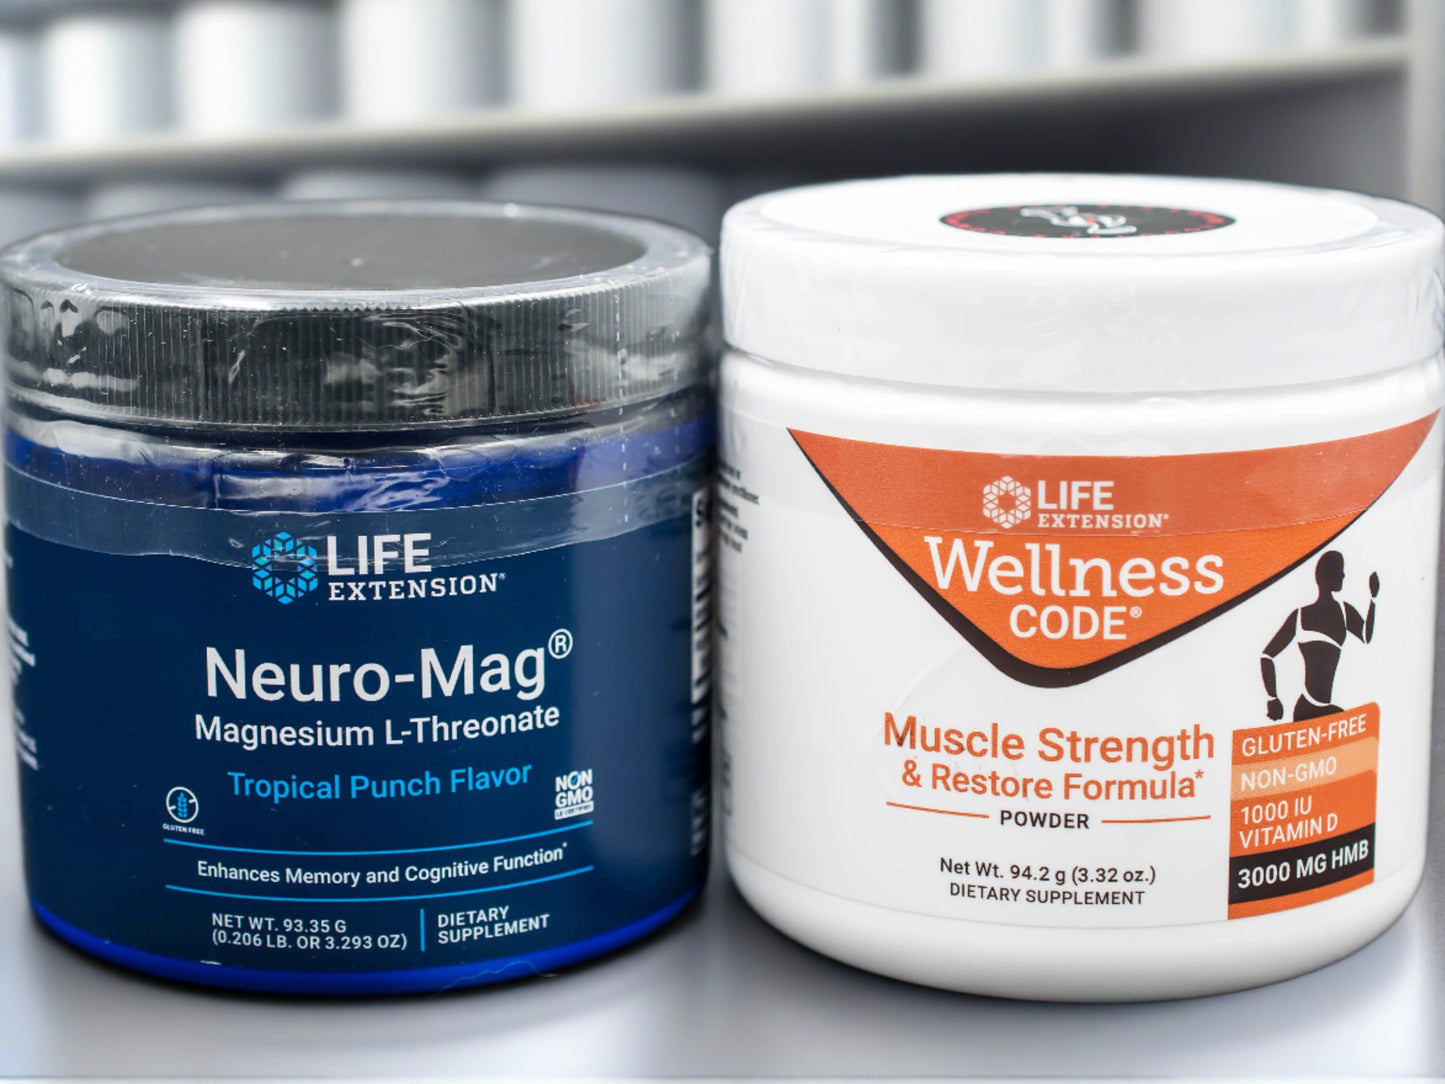 Wellness Code Muscle Strength and Restore Formula and Neuro-Mag Life Extension youutekk